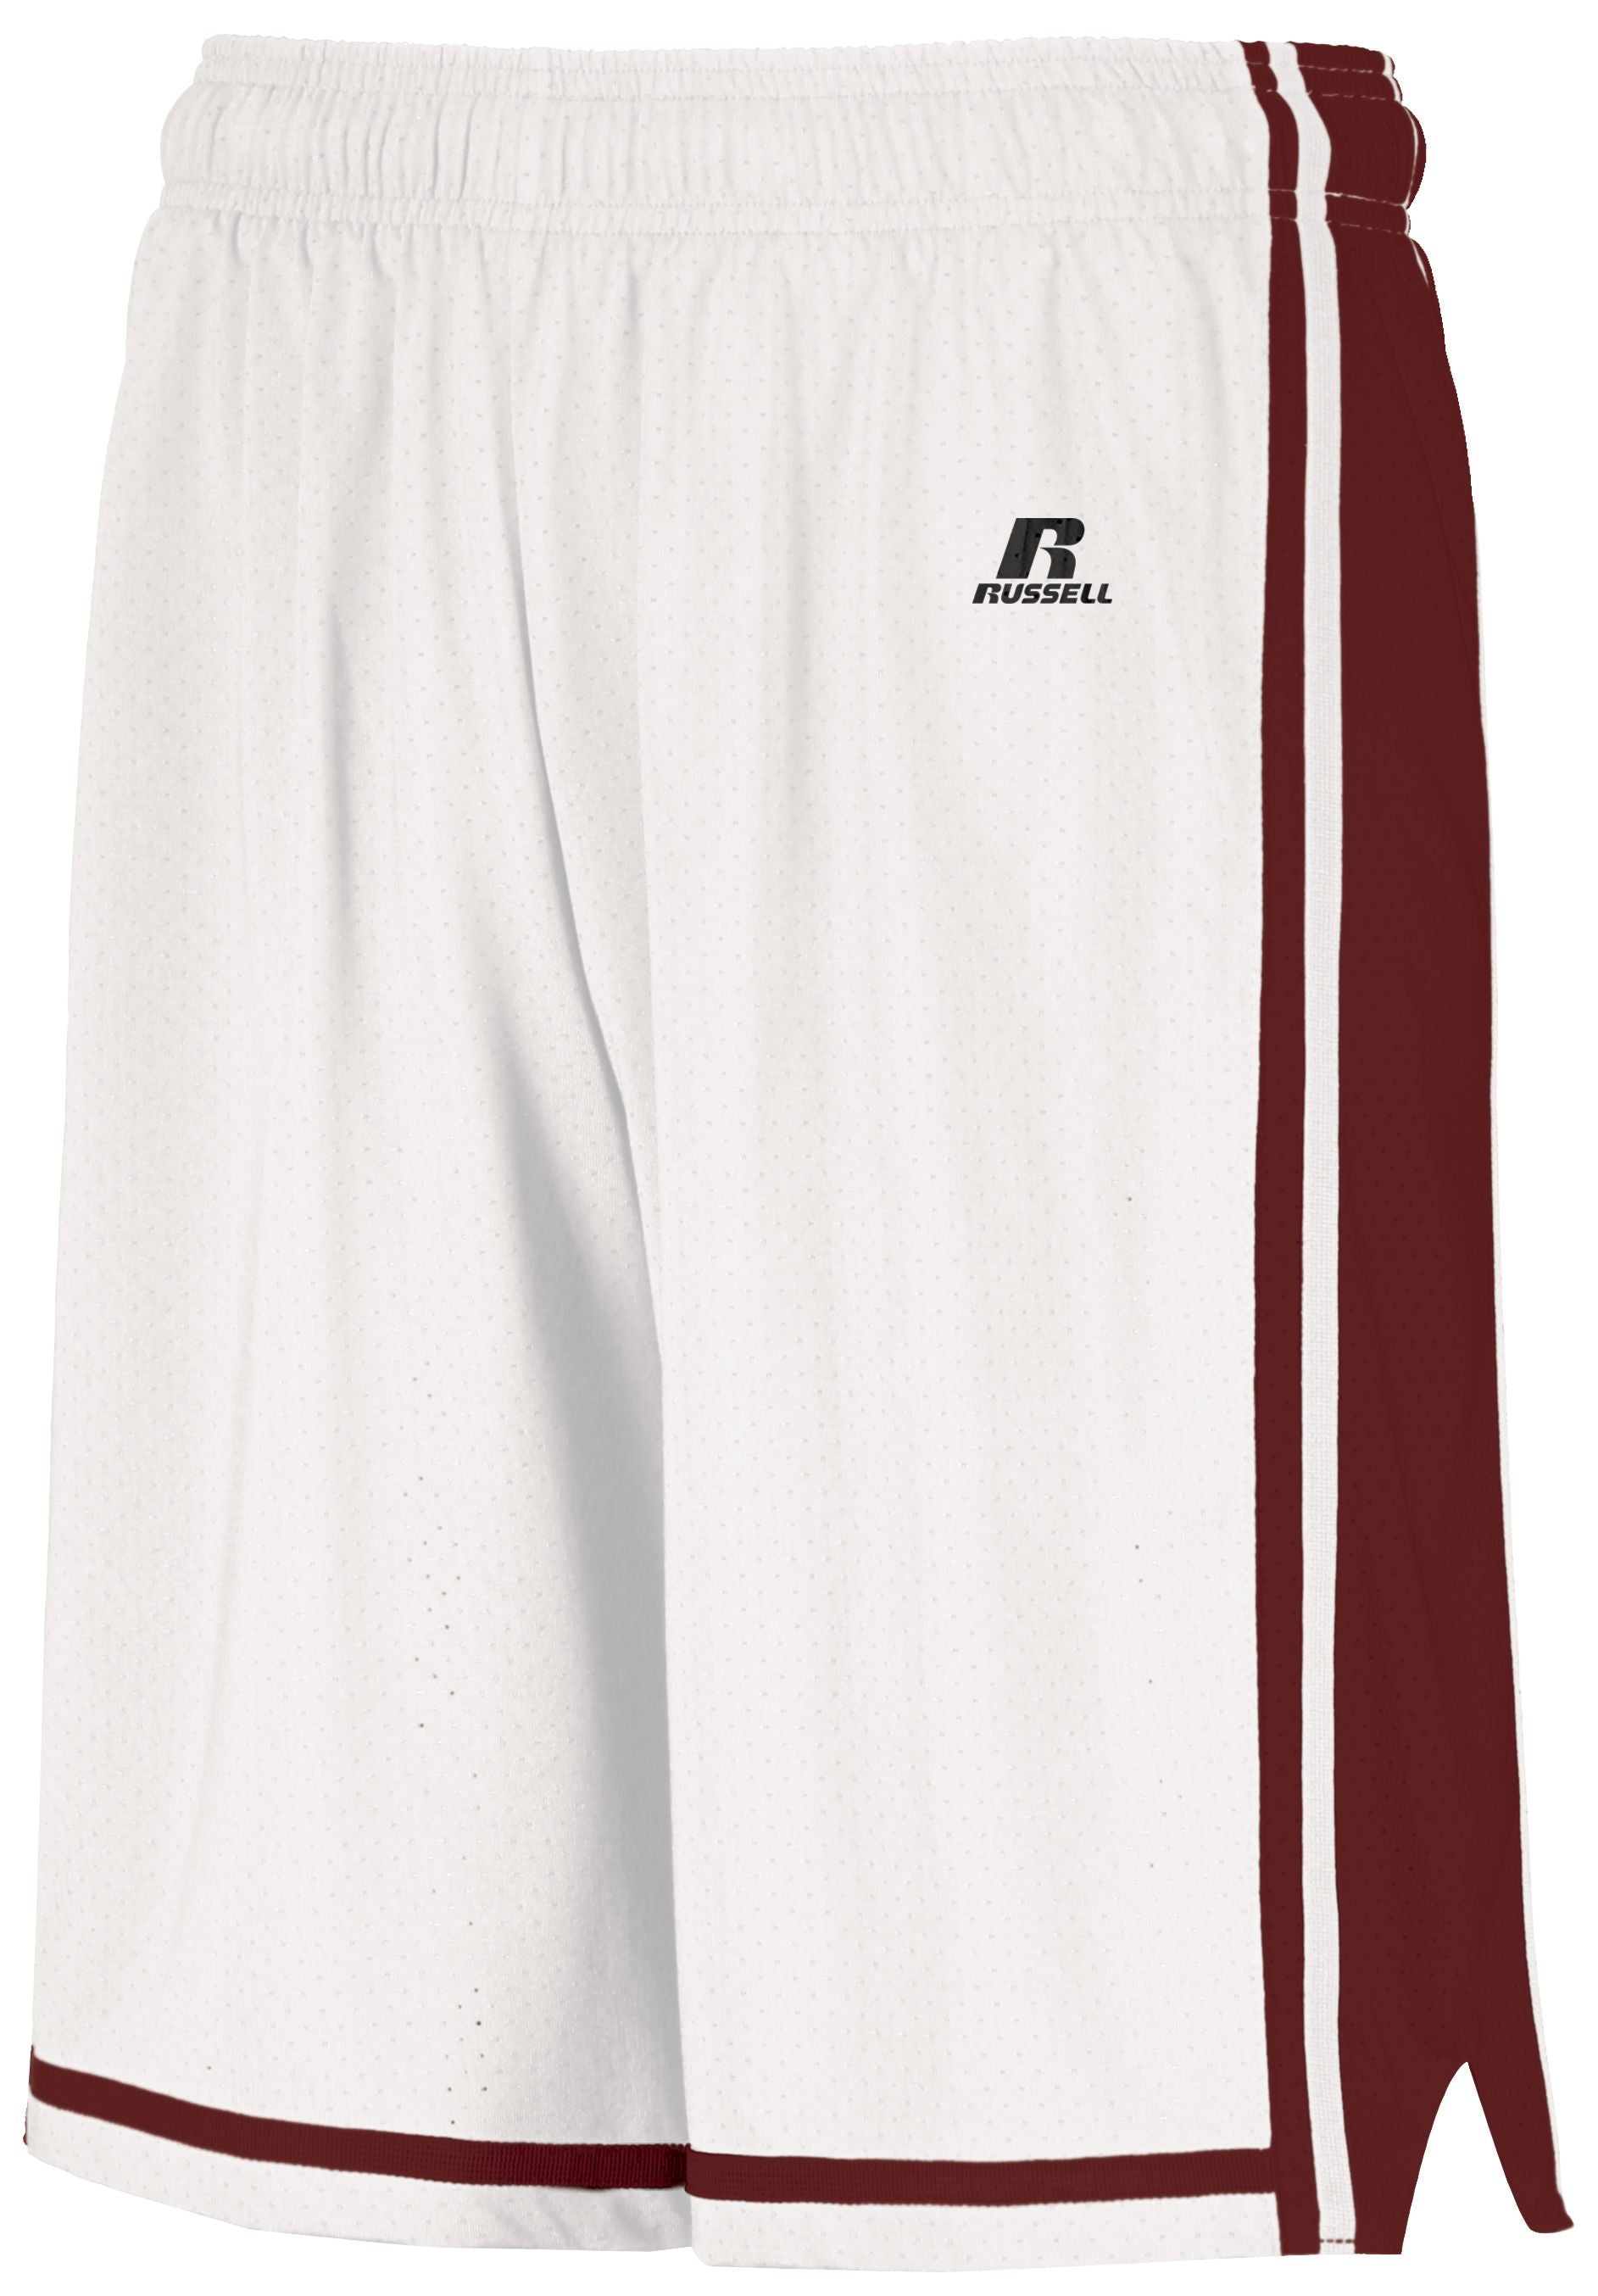 Russell Athletic Youth Legacy Basketball Shorts in White/Cardinal  -Part of the Youth, Youth-Shorts, Basketball, Russell-Athletic-Products, All-Sports, All-Sports-1 product lines at KanaleyCreations.com